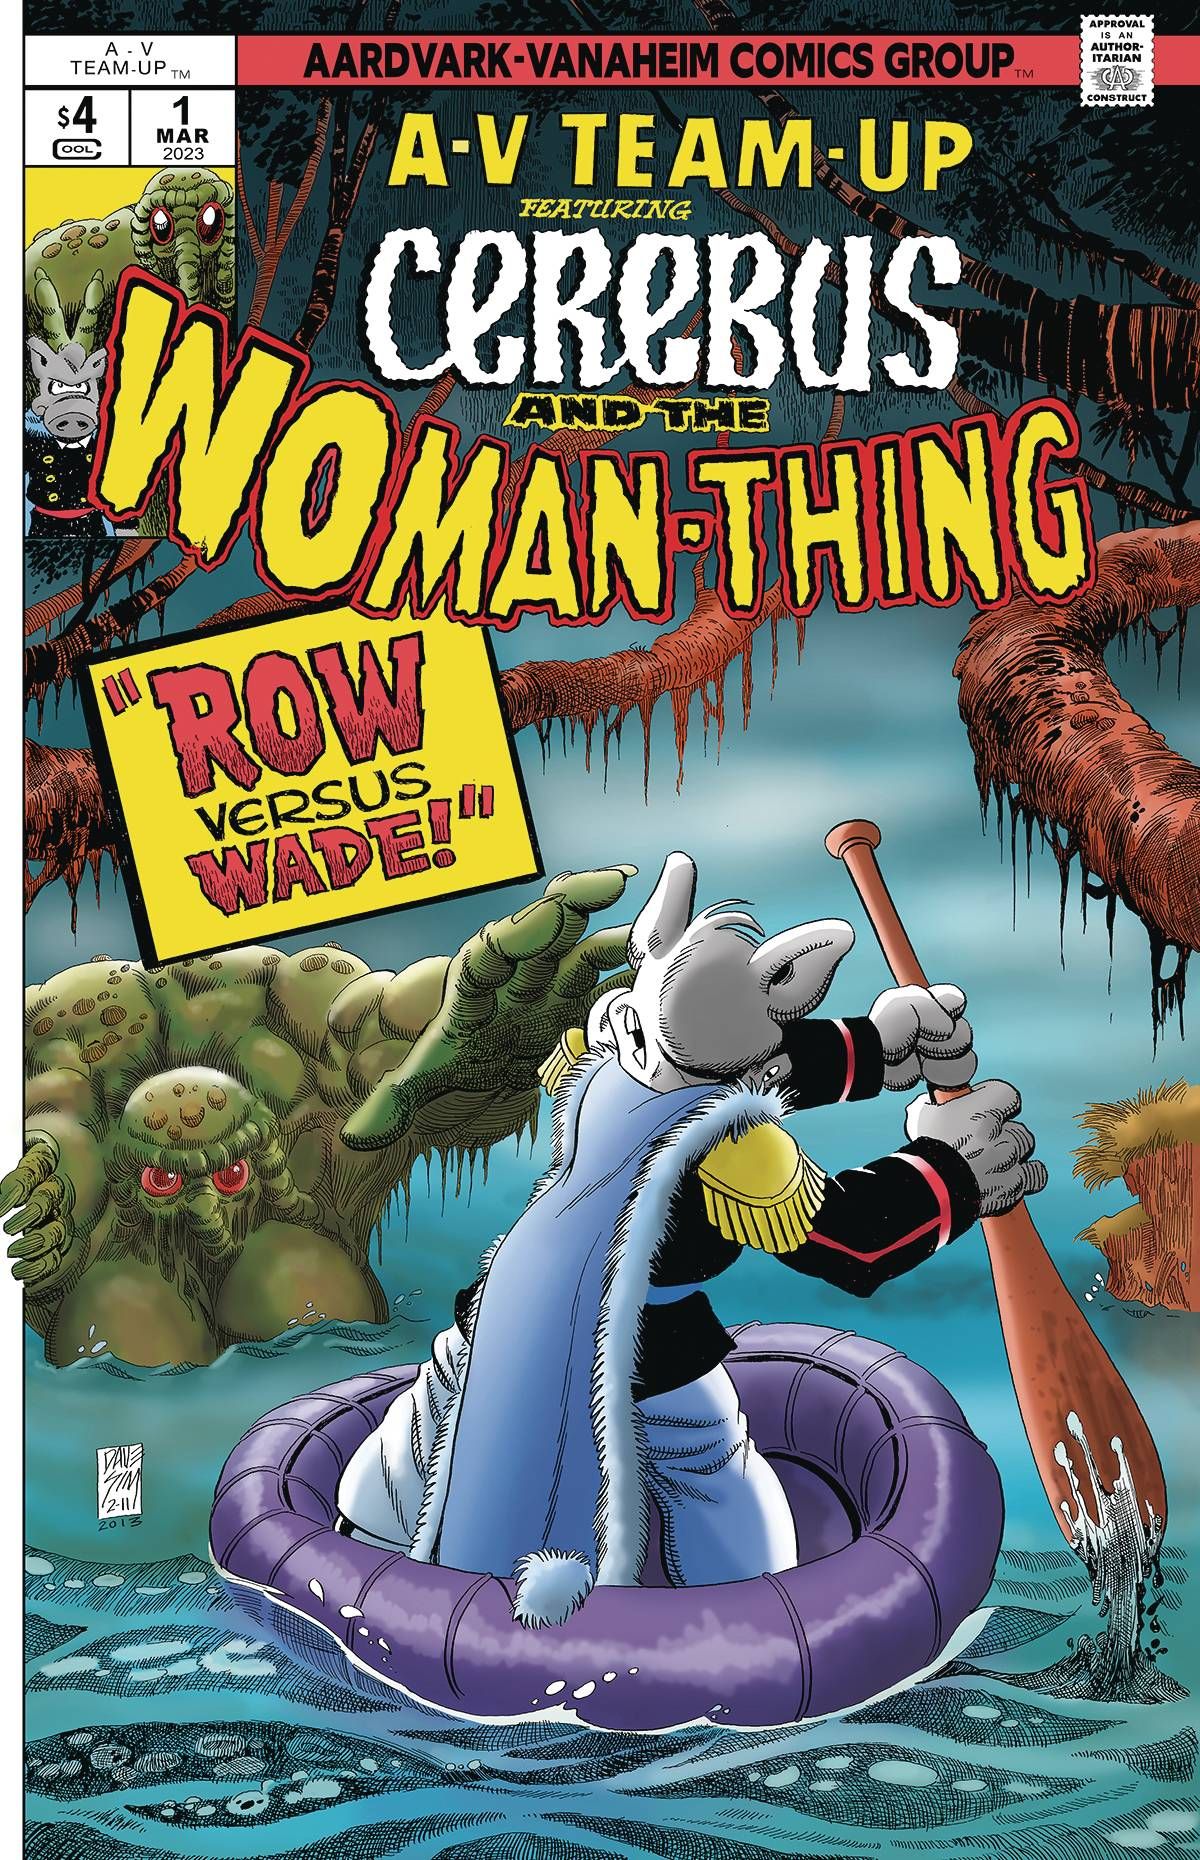 A-V Team-Up: Cerebus and the Woman-Thing #1 Comic